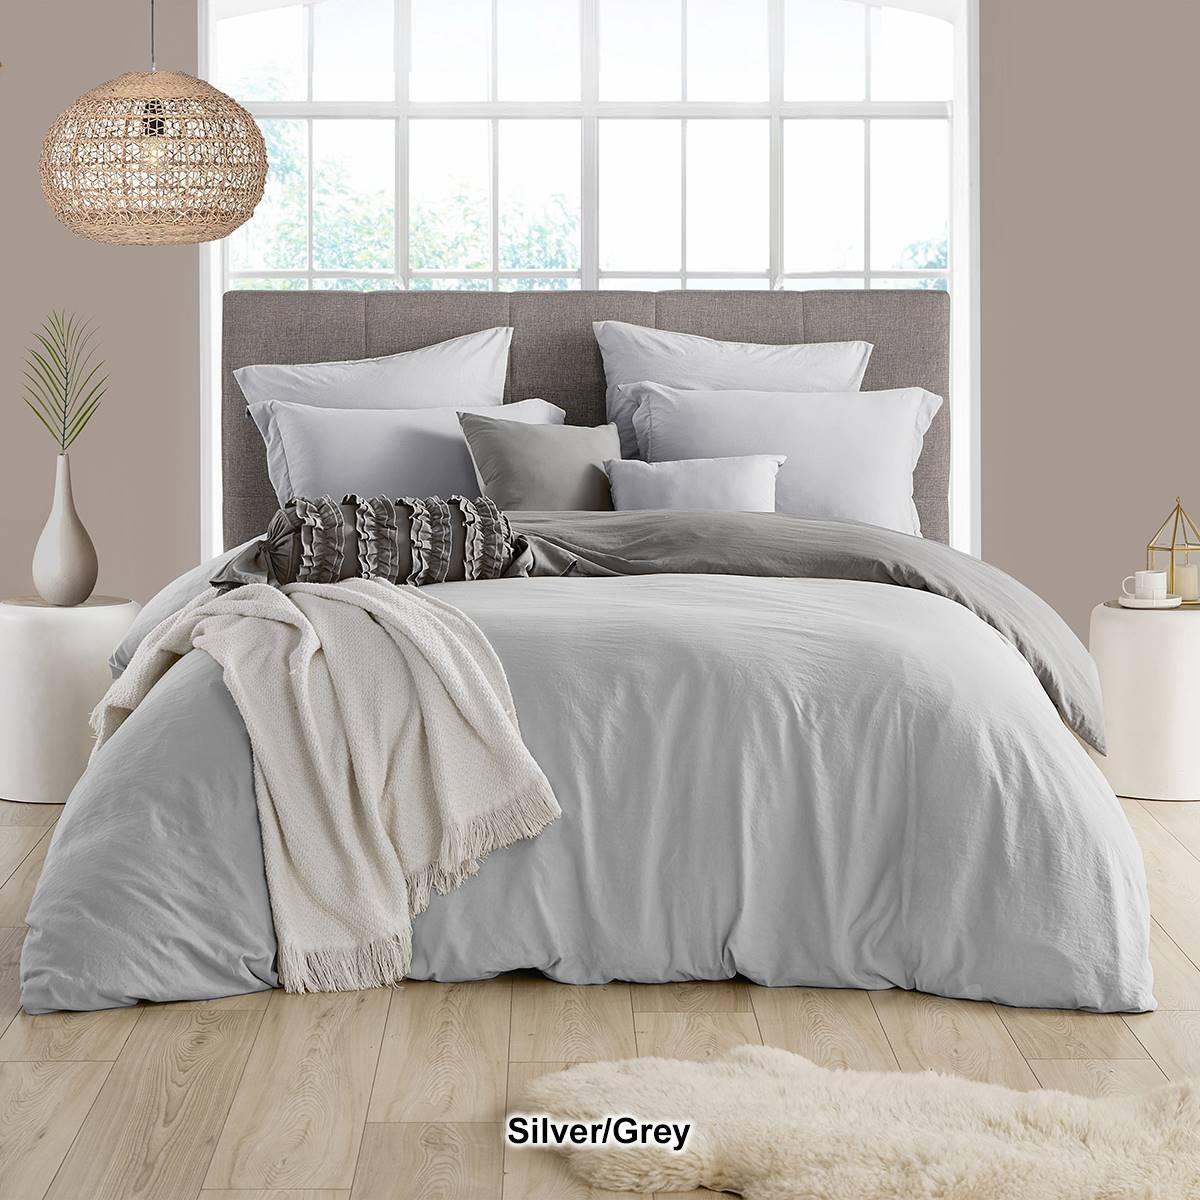 Cathay(R) Swift Home(R) Classic Microfiber Reversible Duvet Cover Set